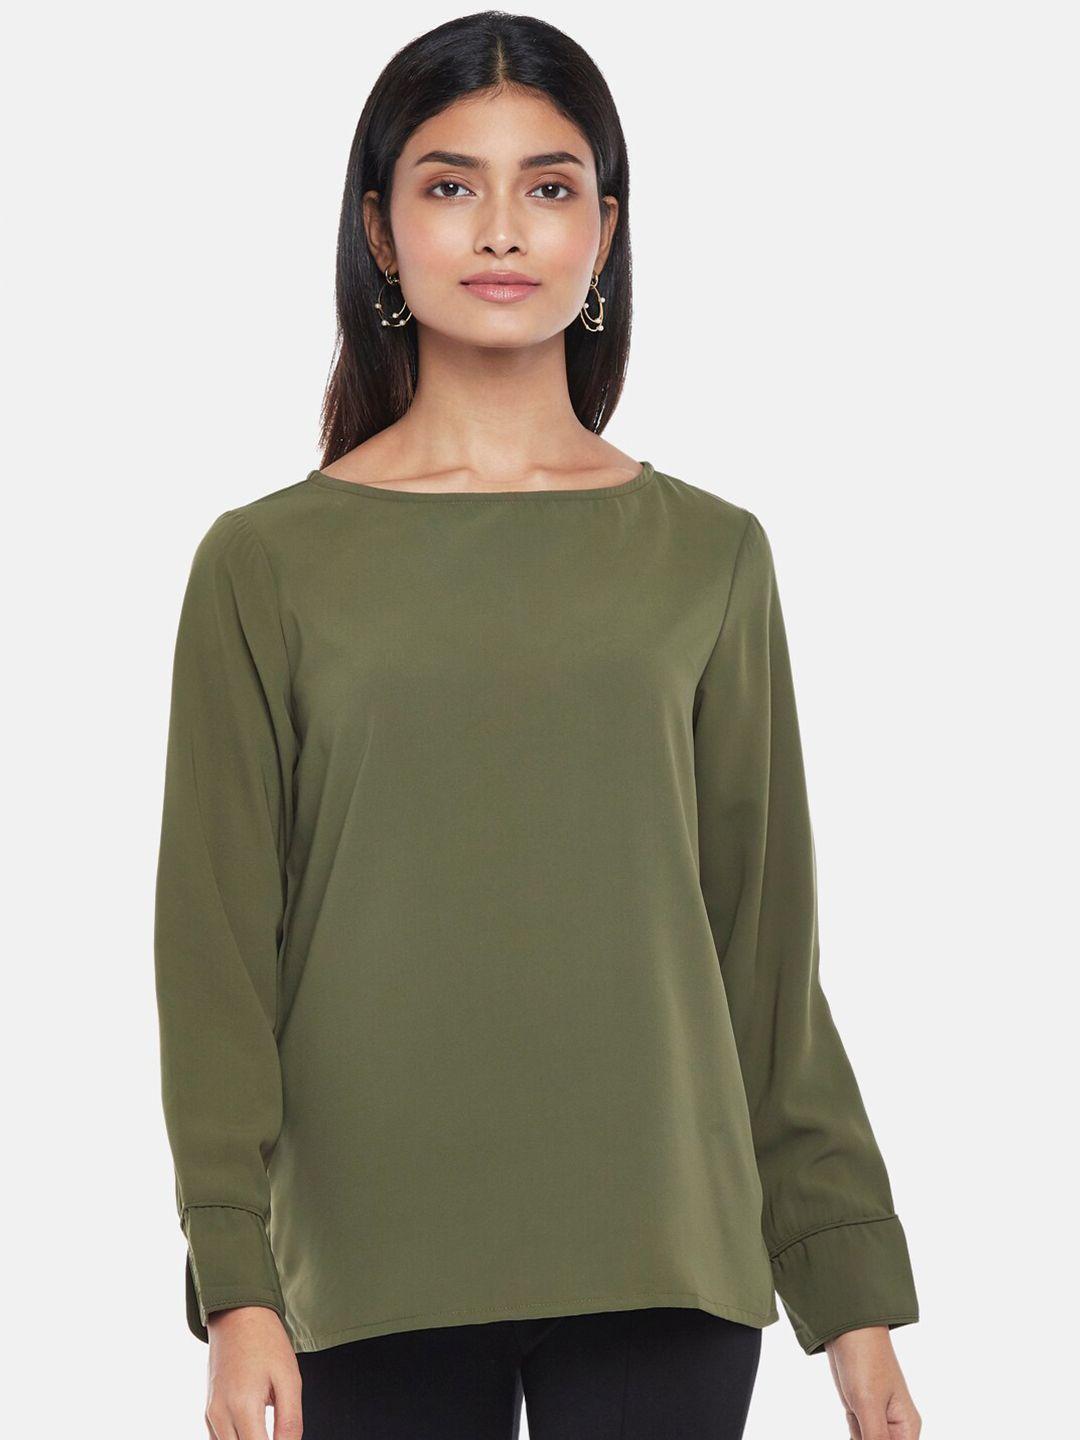 annabelle by pantaloons women olive green boat neck top